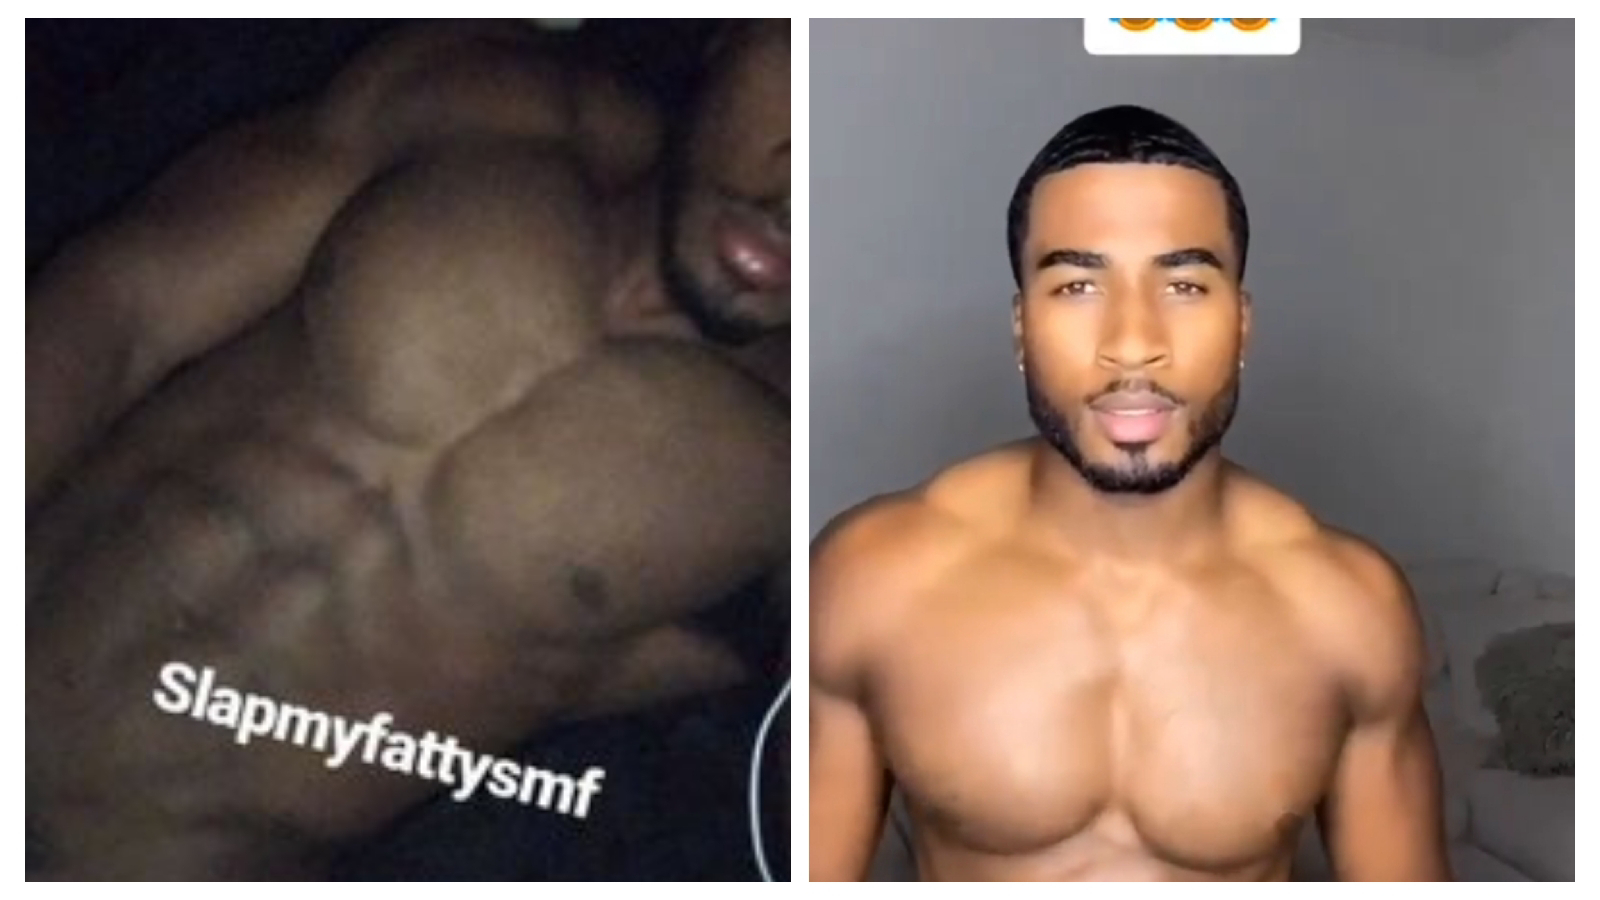 John Gaines Dick Nudes Video Gets Leaked On Twitter